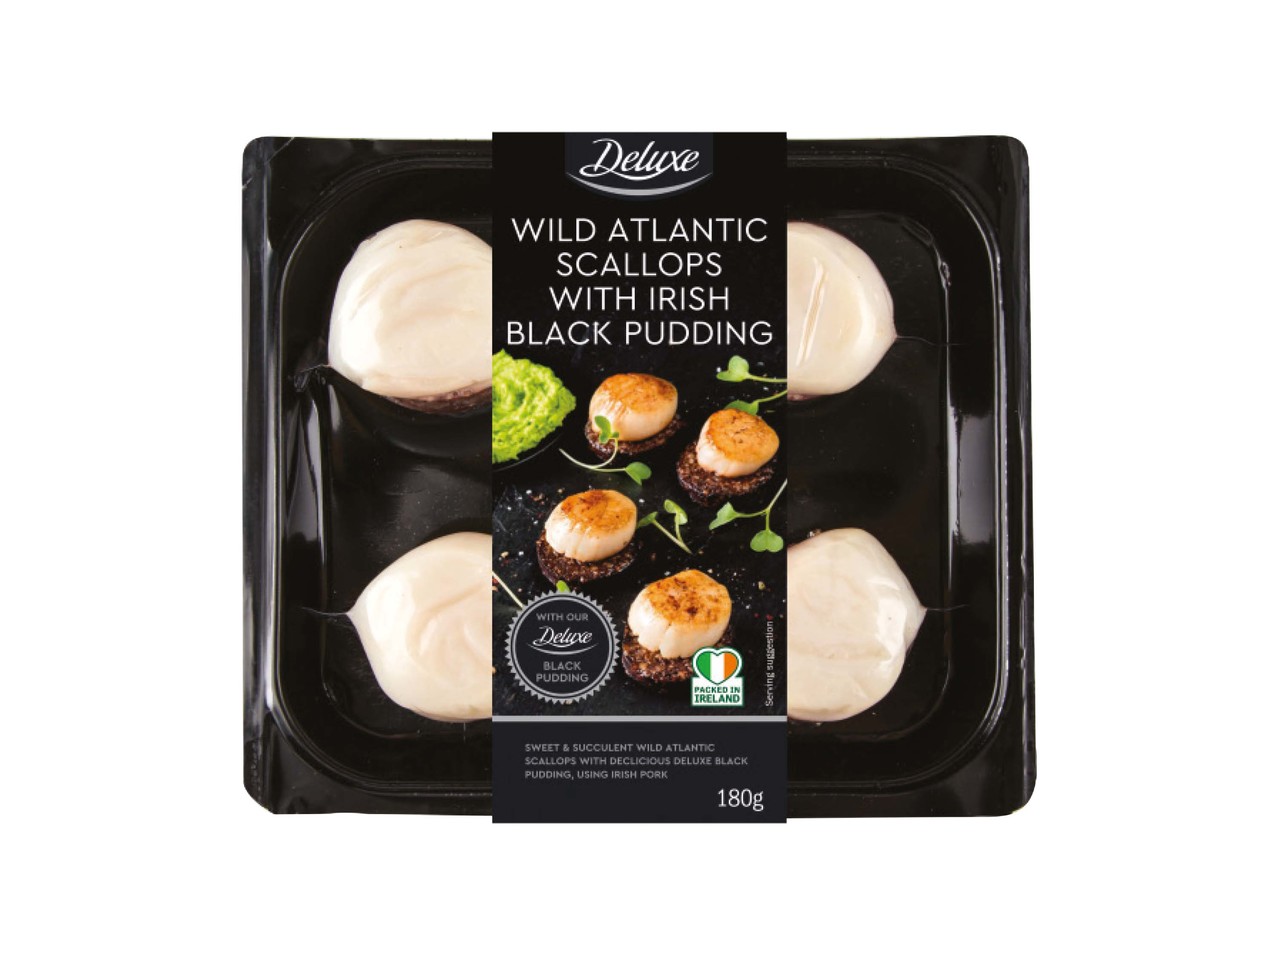 Scallops with Deluxe Black Pudding